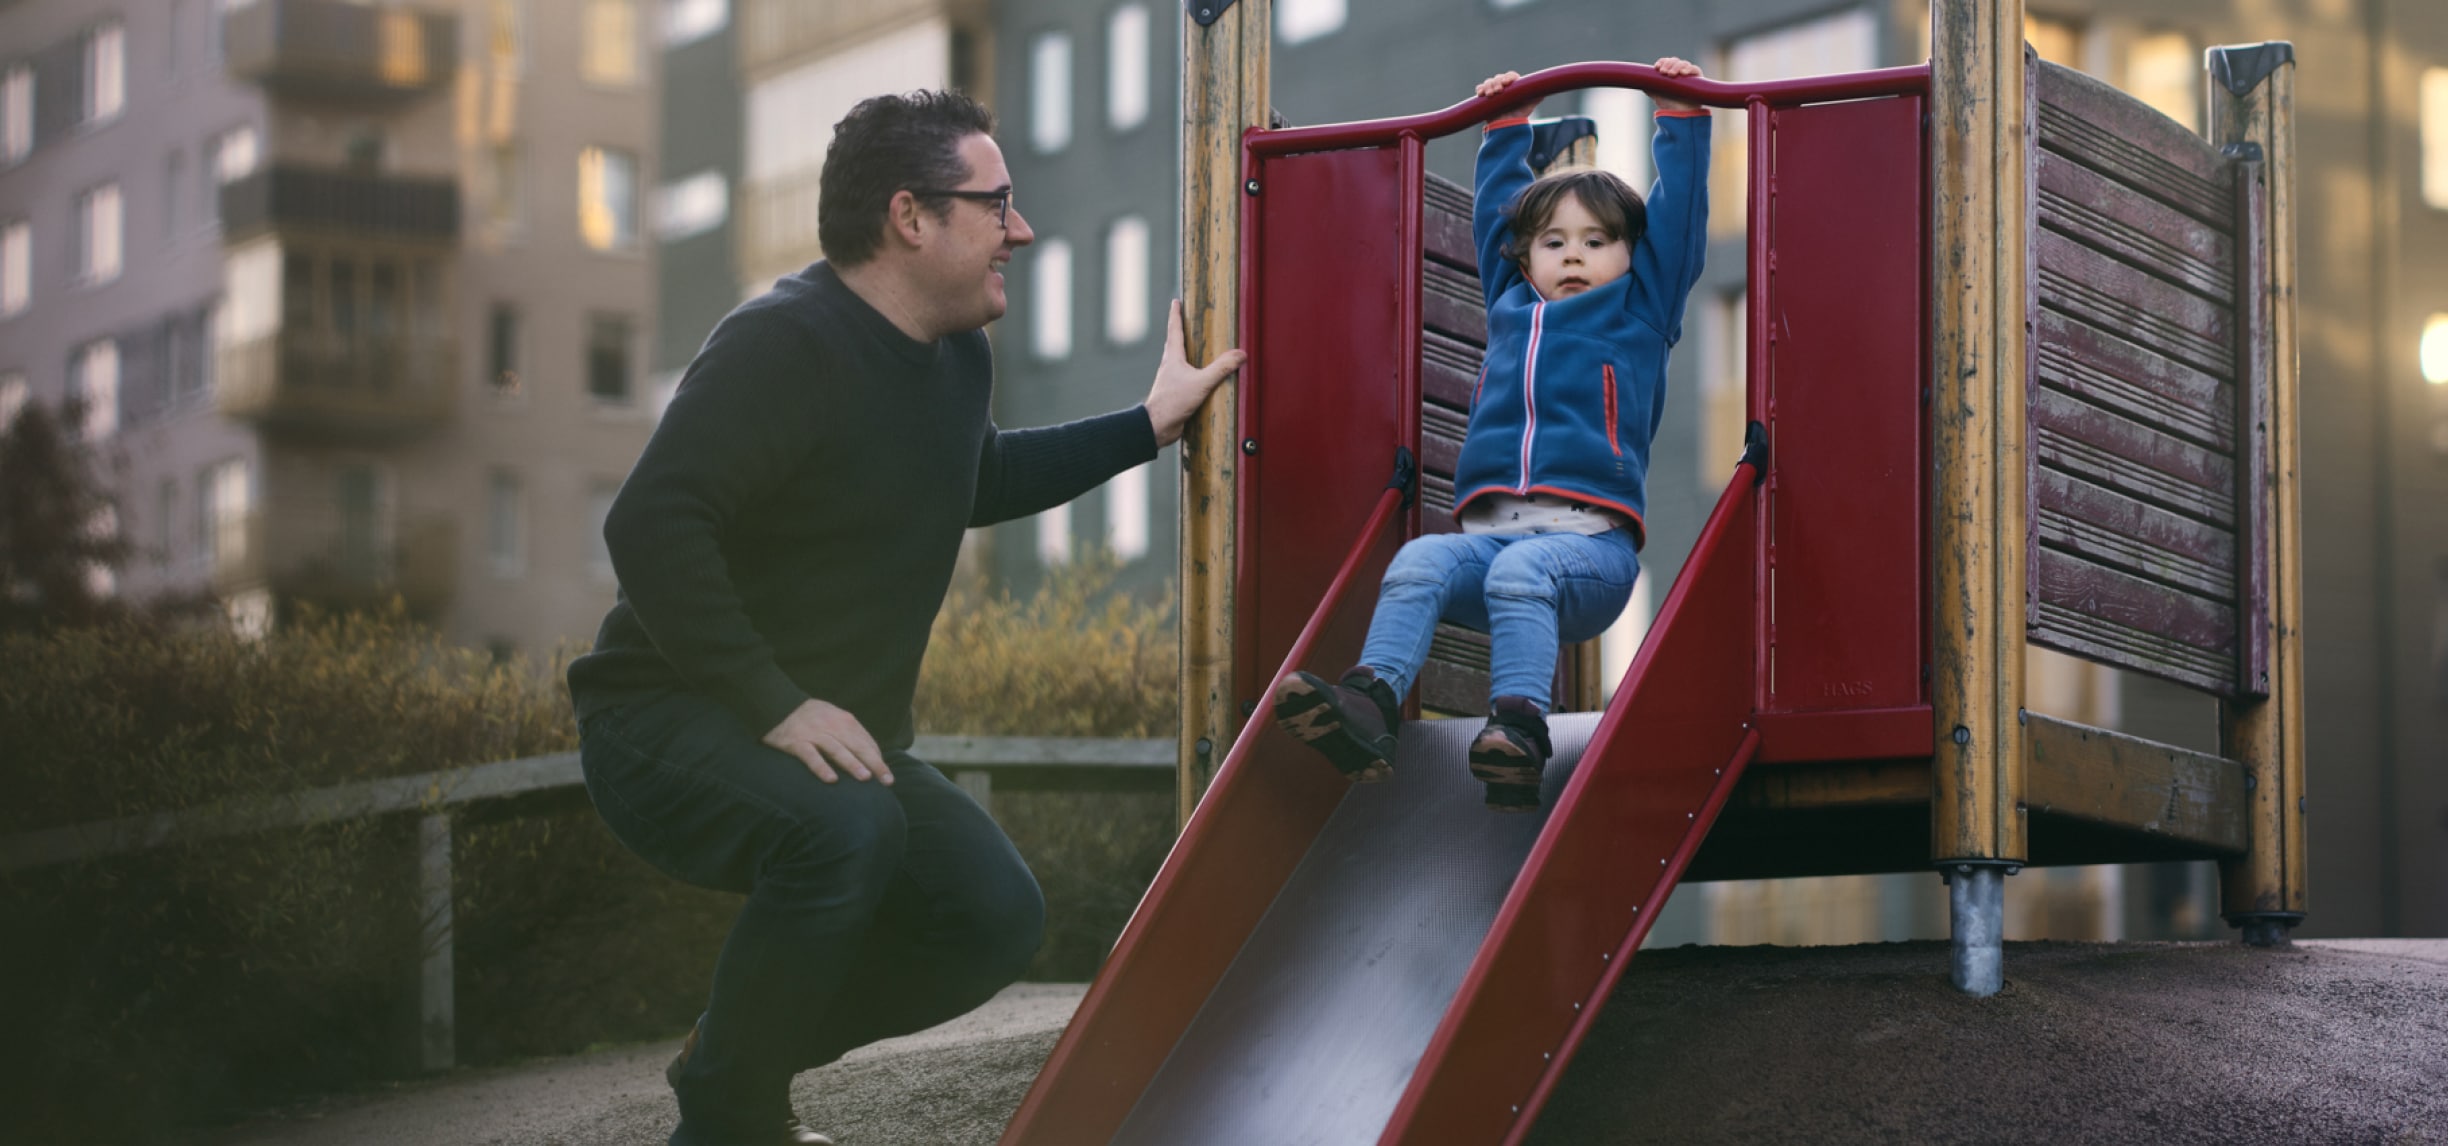 A man smiling at a toddler coming down a slide in a play area for kids.